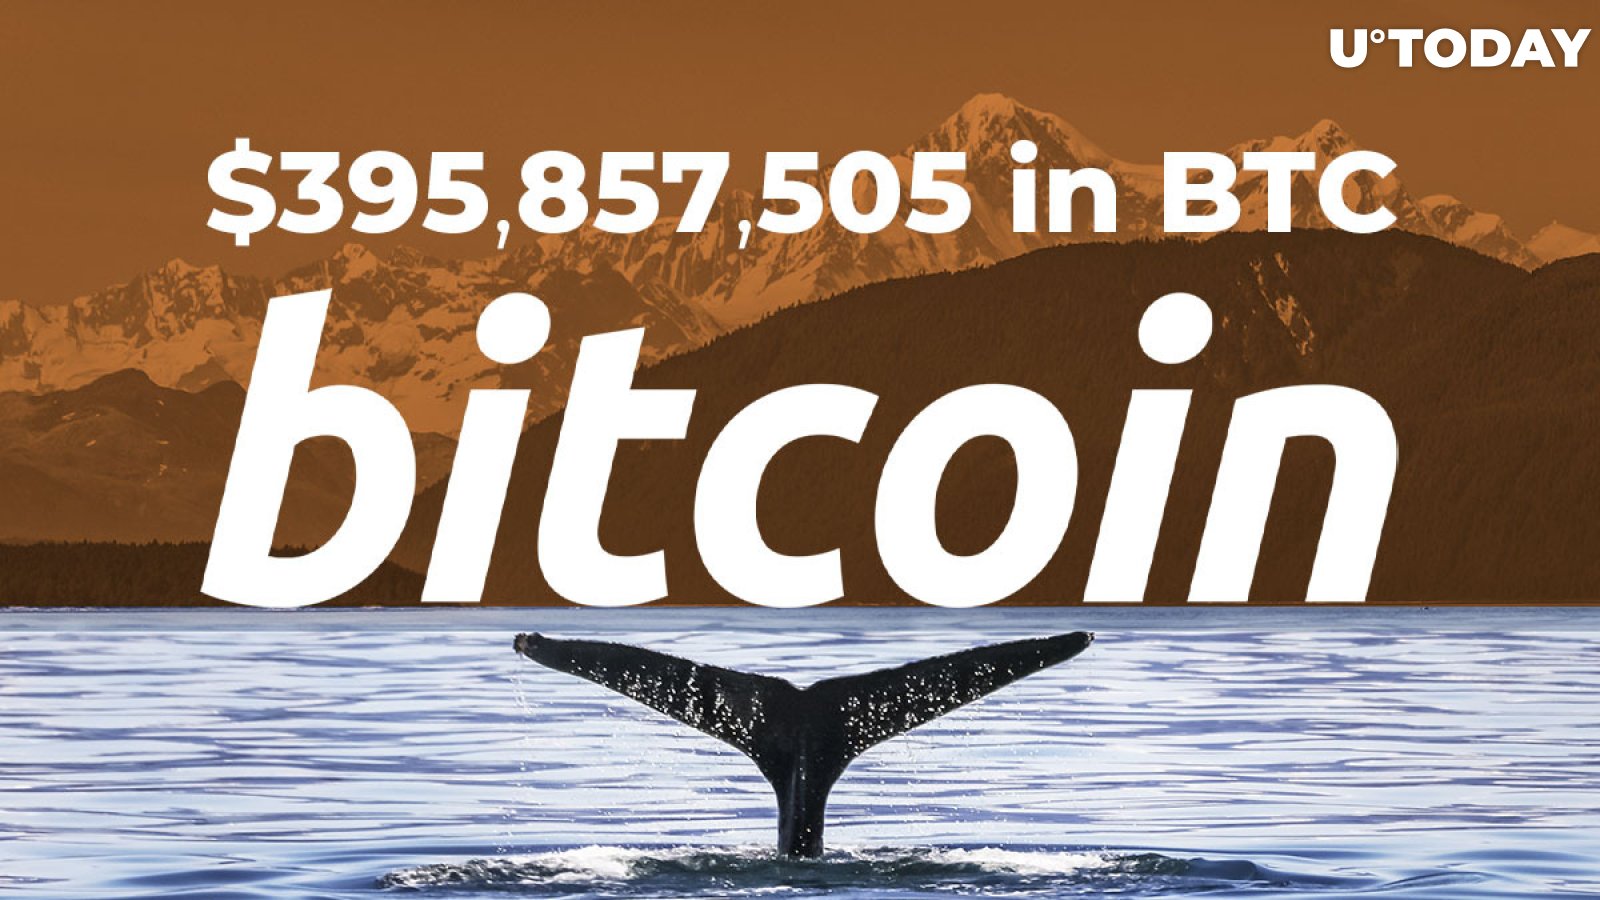 Bitcoin Whales Shift $395,857,505 in BTC for Fee Banks Would Never Offer